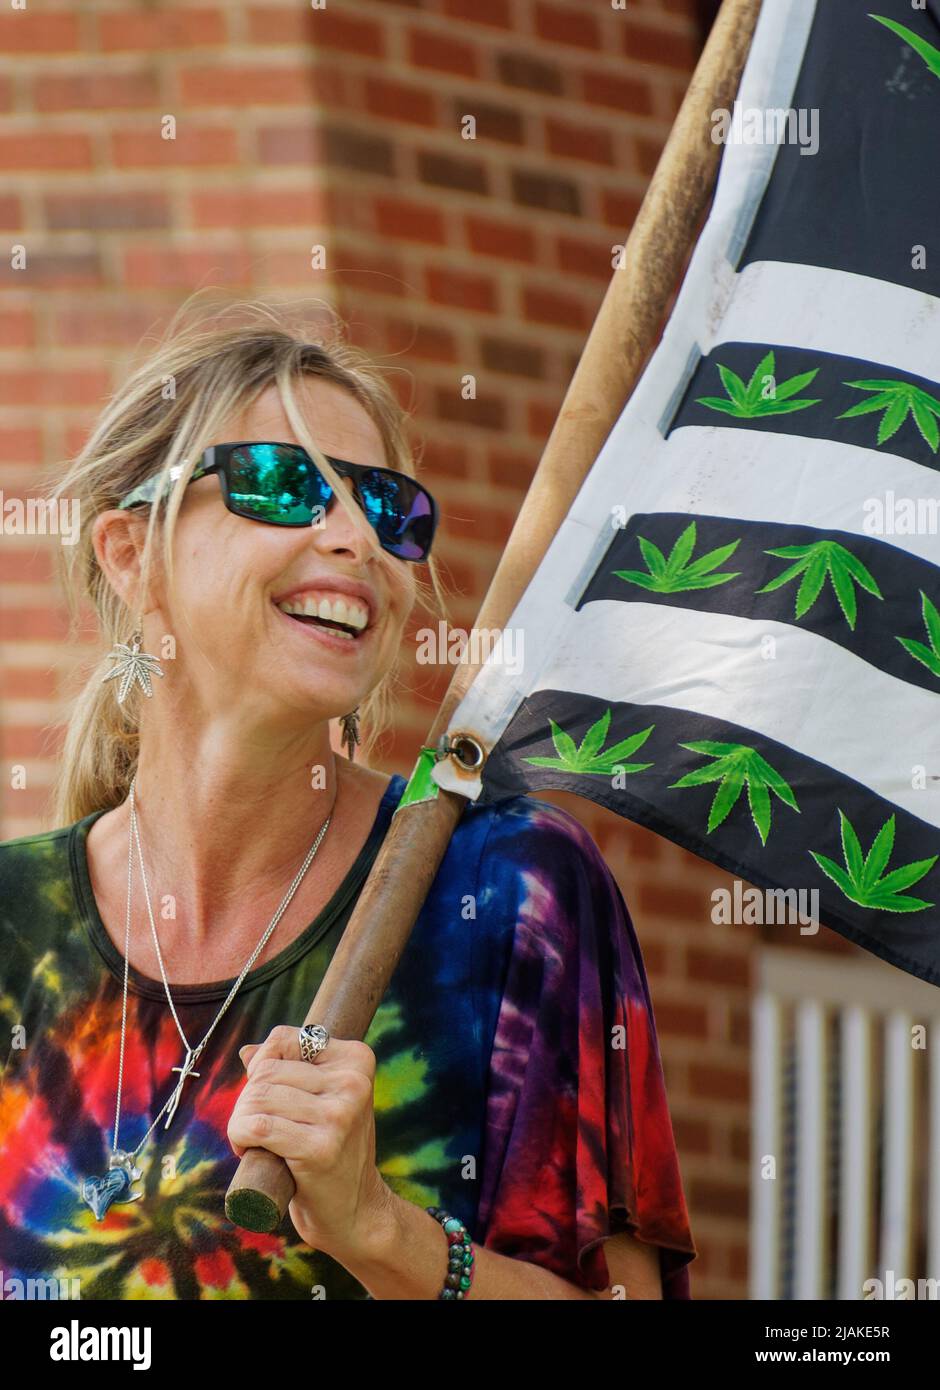 Marijuana legalization advocate and 'Canna Sense Campaign' co-founder Stacey Shepherd Theis carries a flag covered with marijuana leaves at the 141st Fancy Farm Picnic on Saturday, Aug. 7, 2021 in Fancy Farm, Graves County, KY, USA. Theis has said her uncle, Gary Shepherd, was a marijuana grower shot and killed by Kentucky State Police in a 1993 Rockcastle County drug raid in which police attempted to destroy 12 cannabis plants. (Apex MediaWire Photo by Joel Wolford) Stock Photo